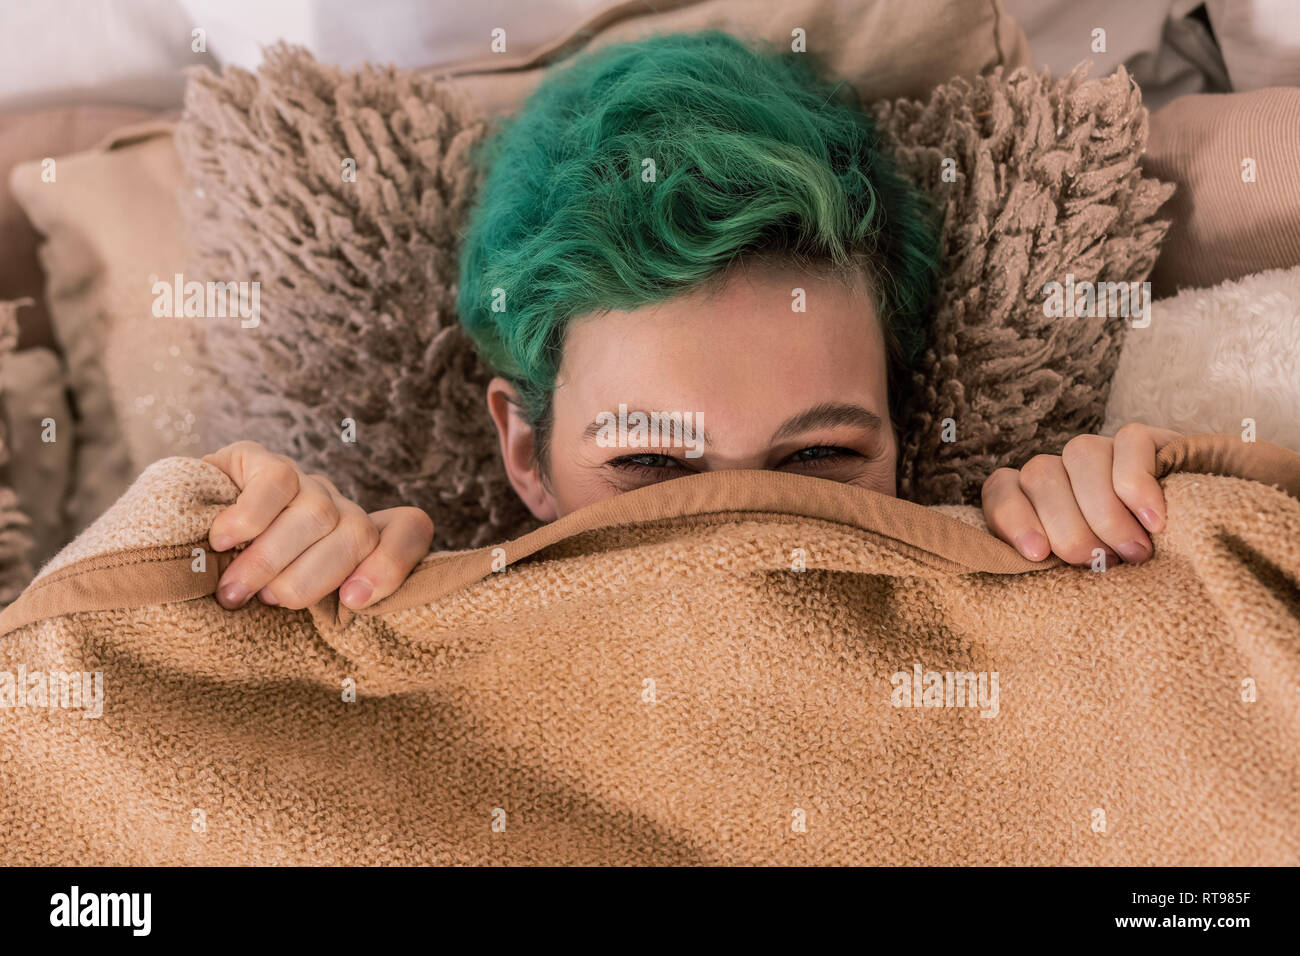 Green-haired woman lying on brown plaid moelleux oreiller sous Banque D'Images